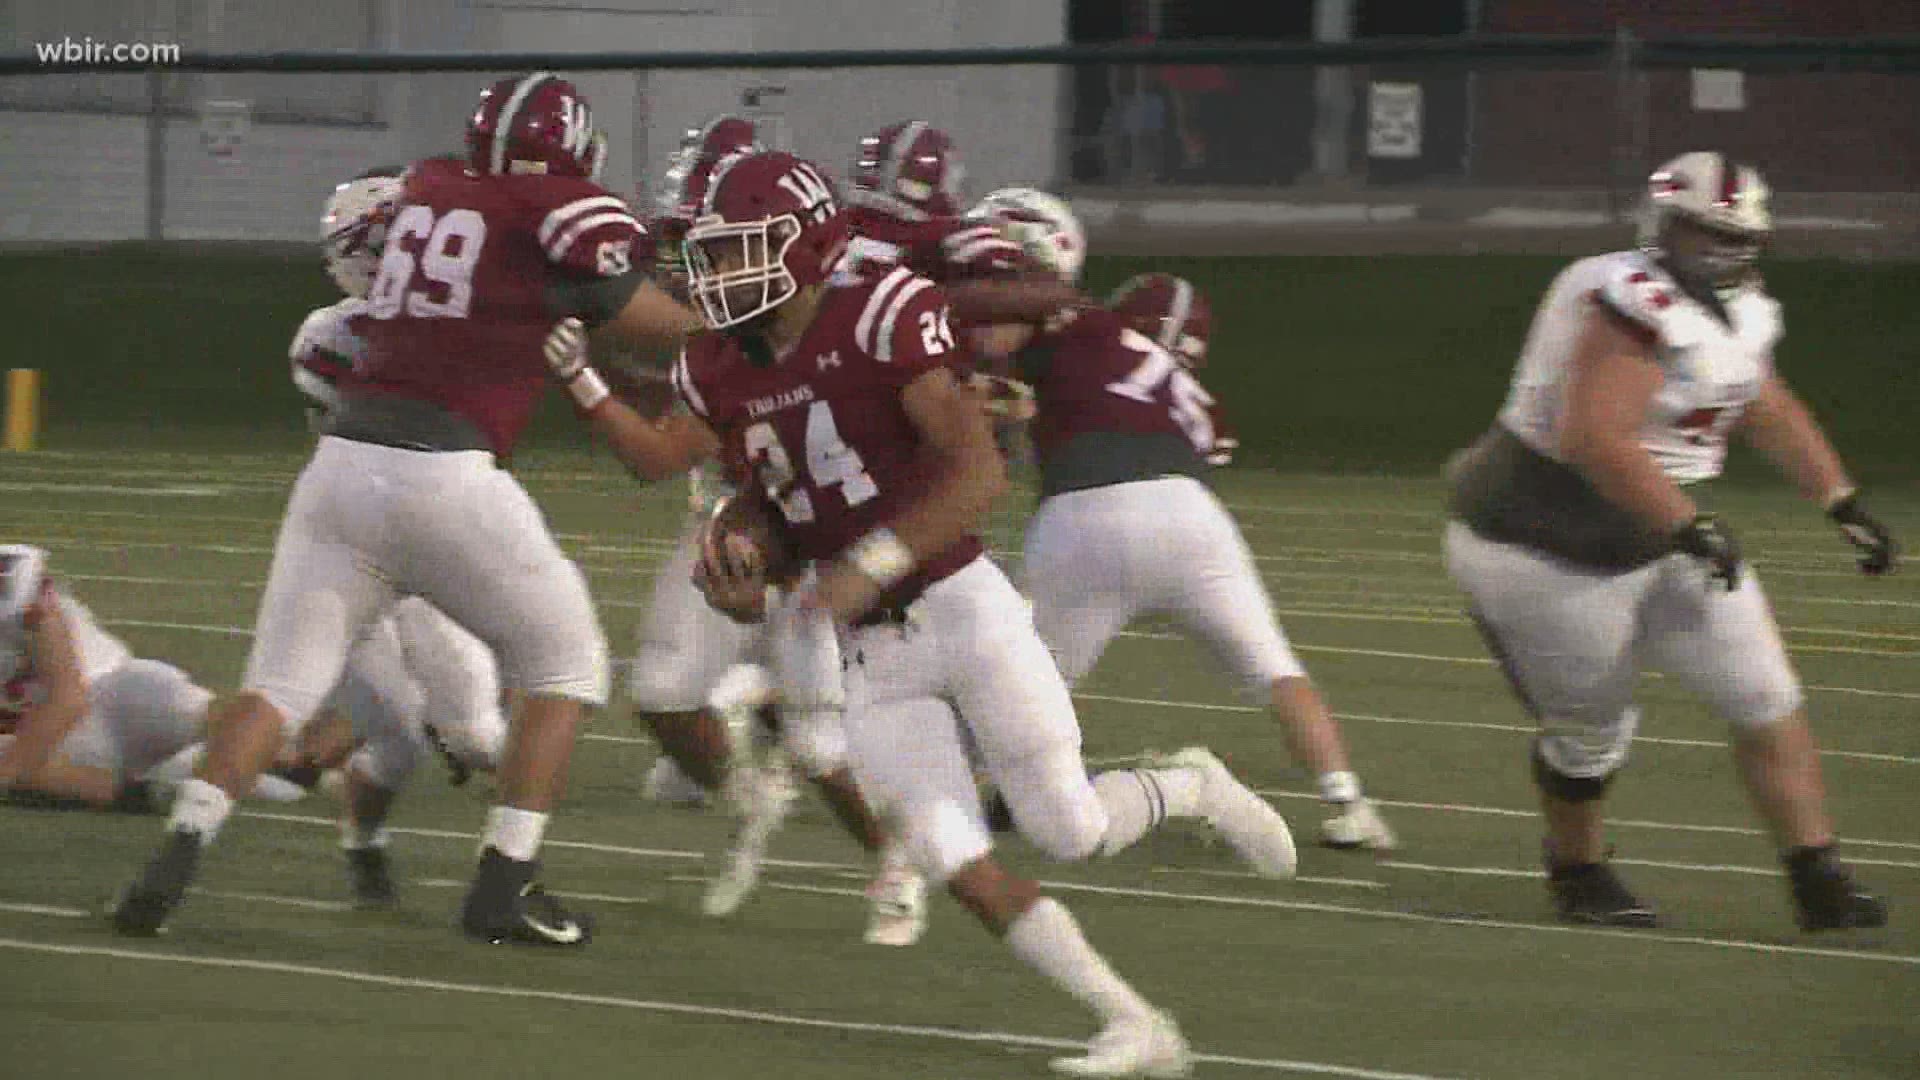 Morristown West picks up another win, shutting out Cherokee at home.